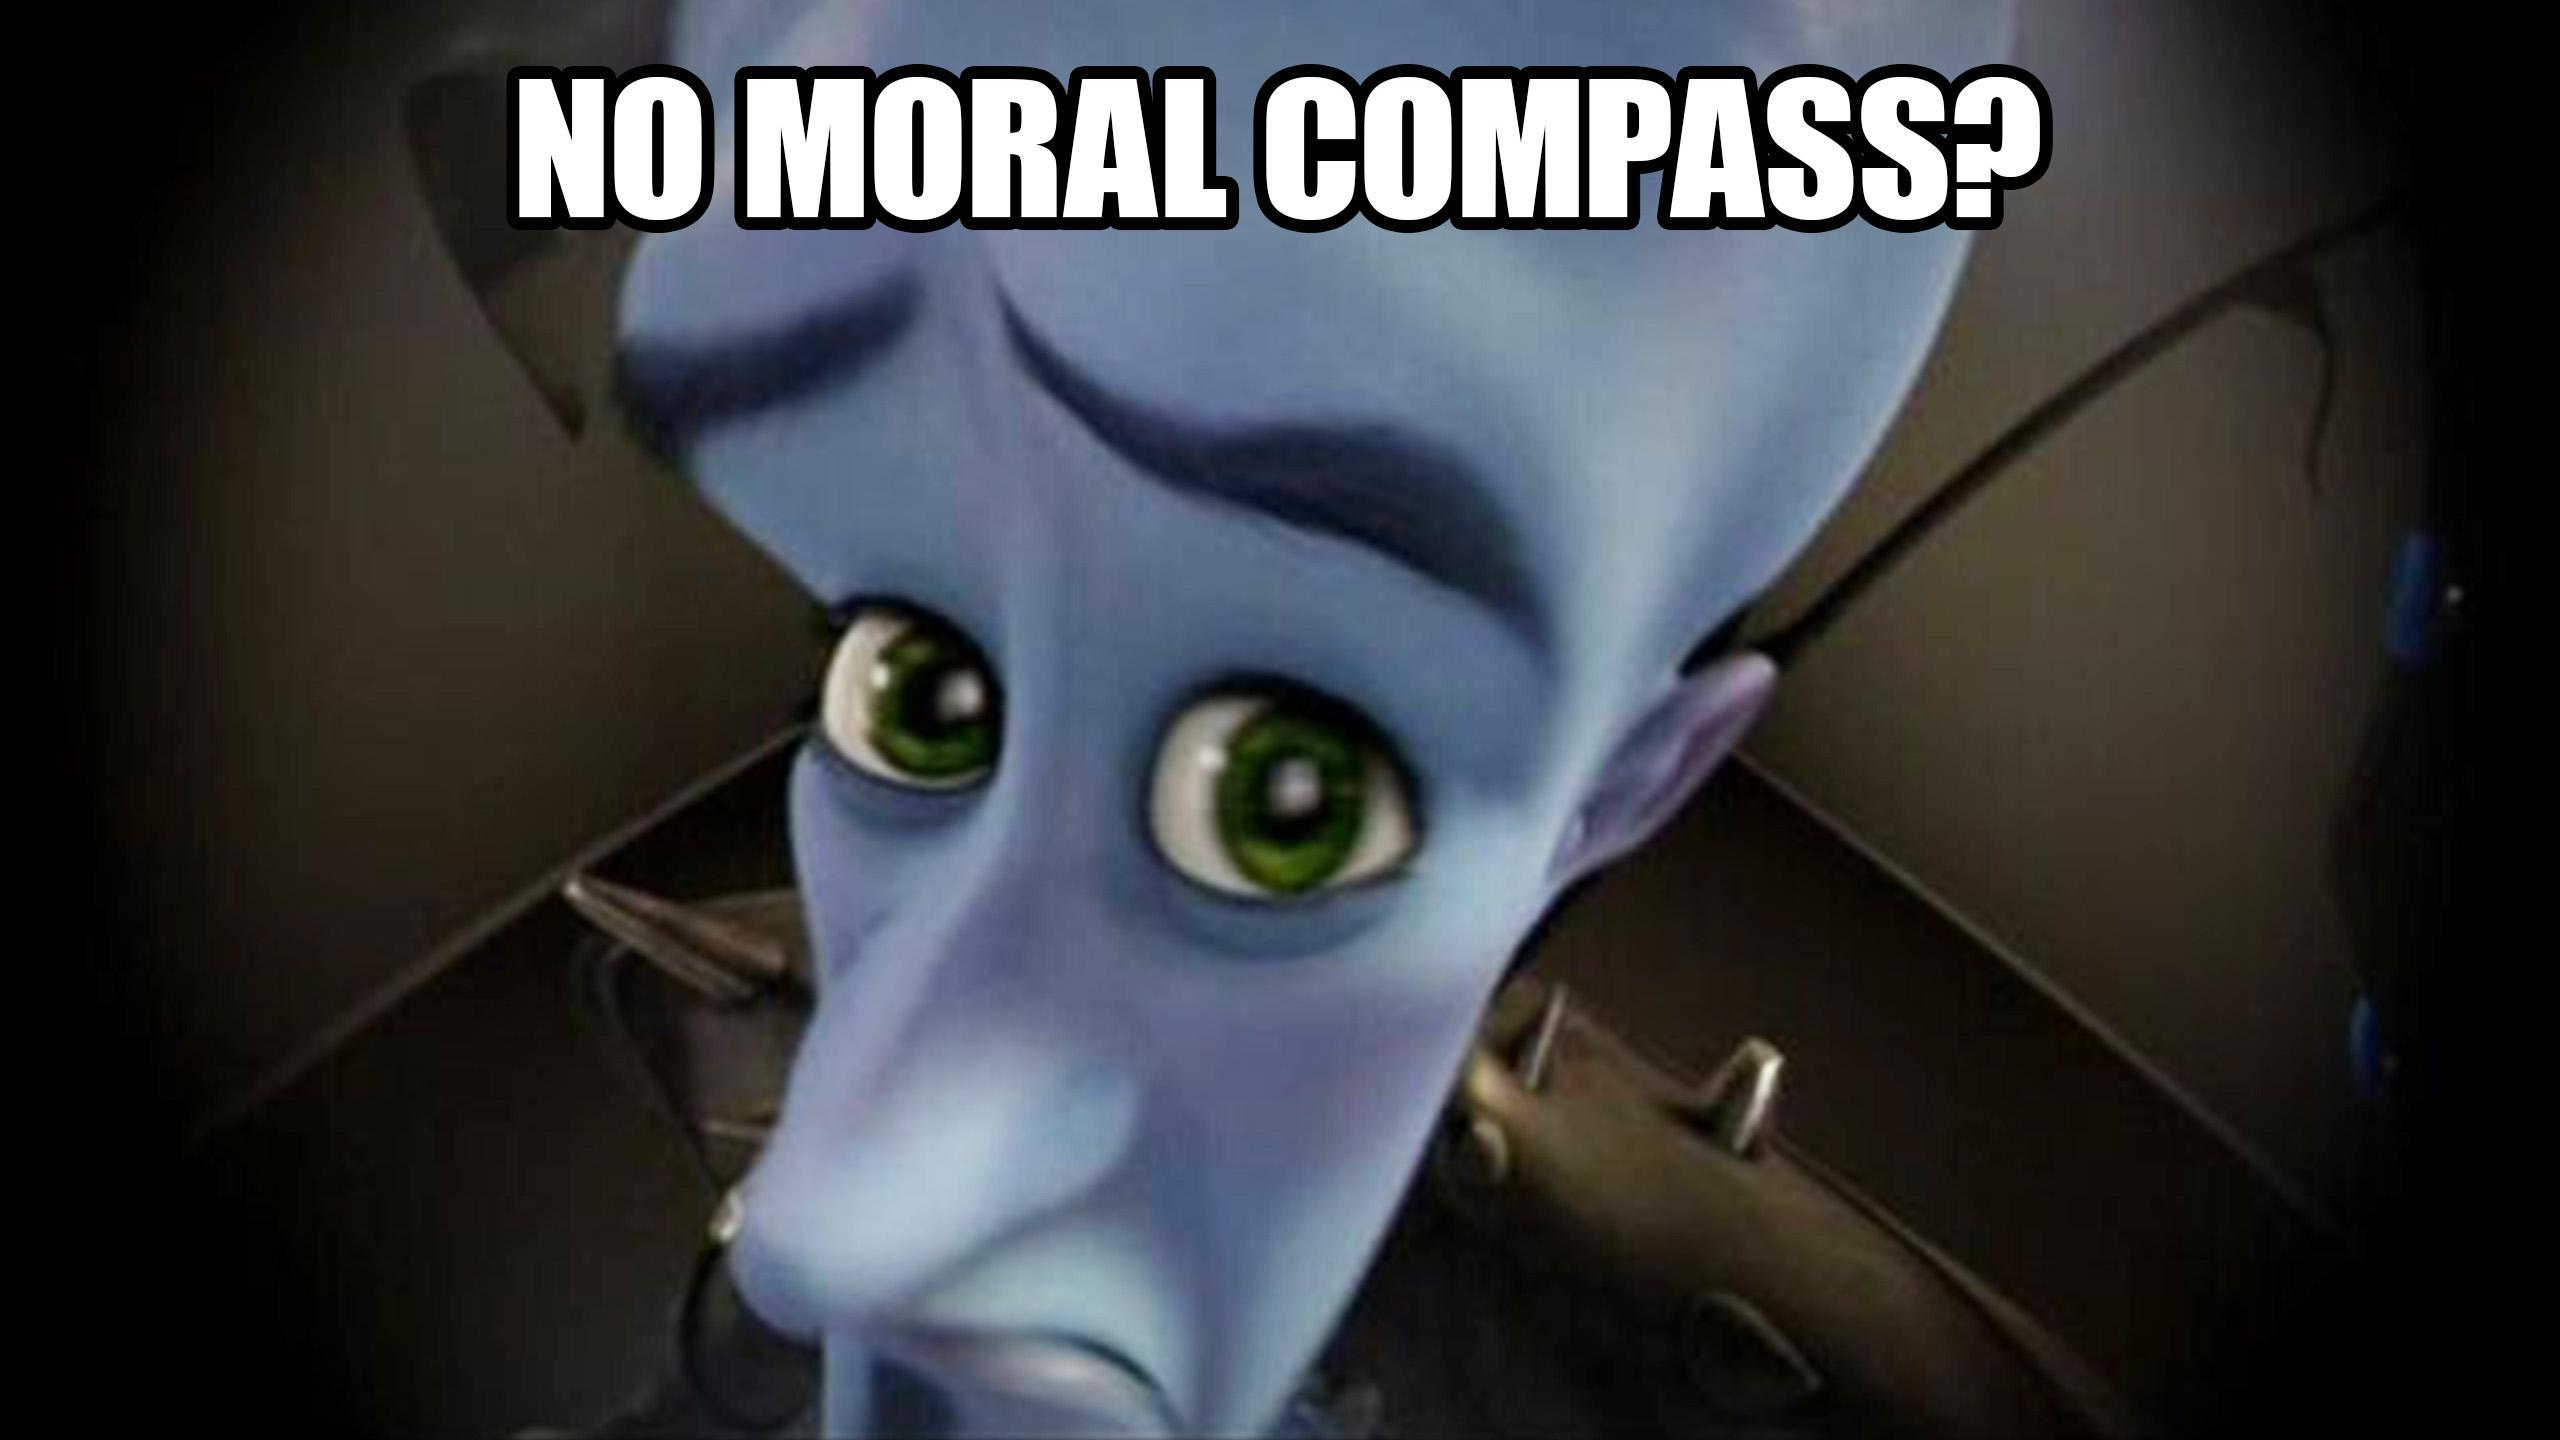 an image of the fictional character megamind with the text above his head in meme format saying "no moral compass?"